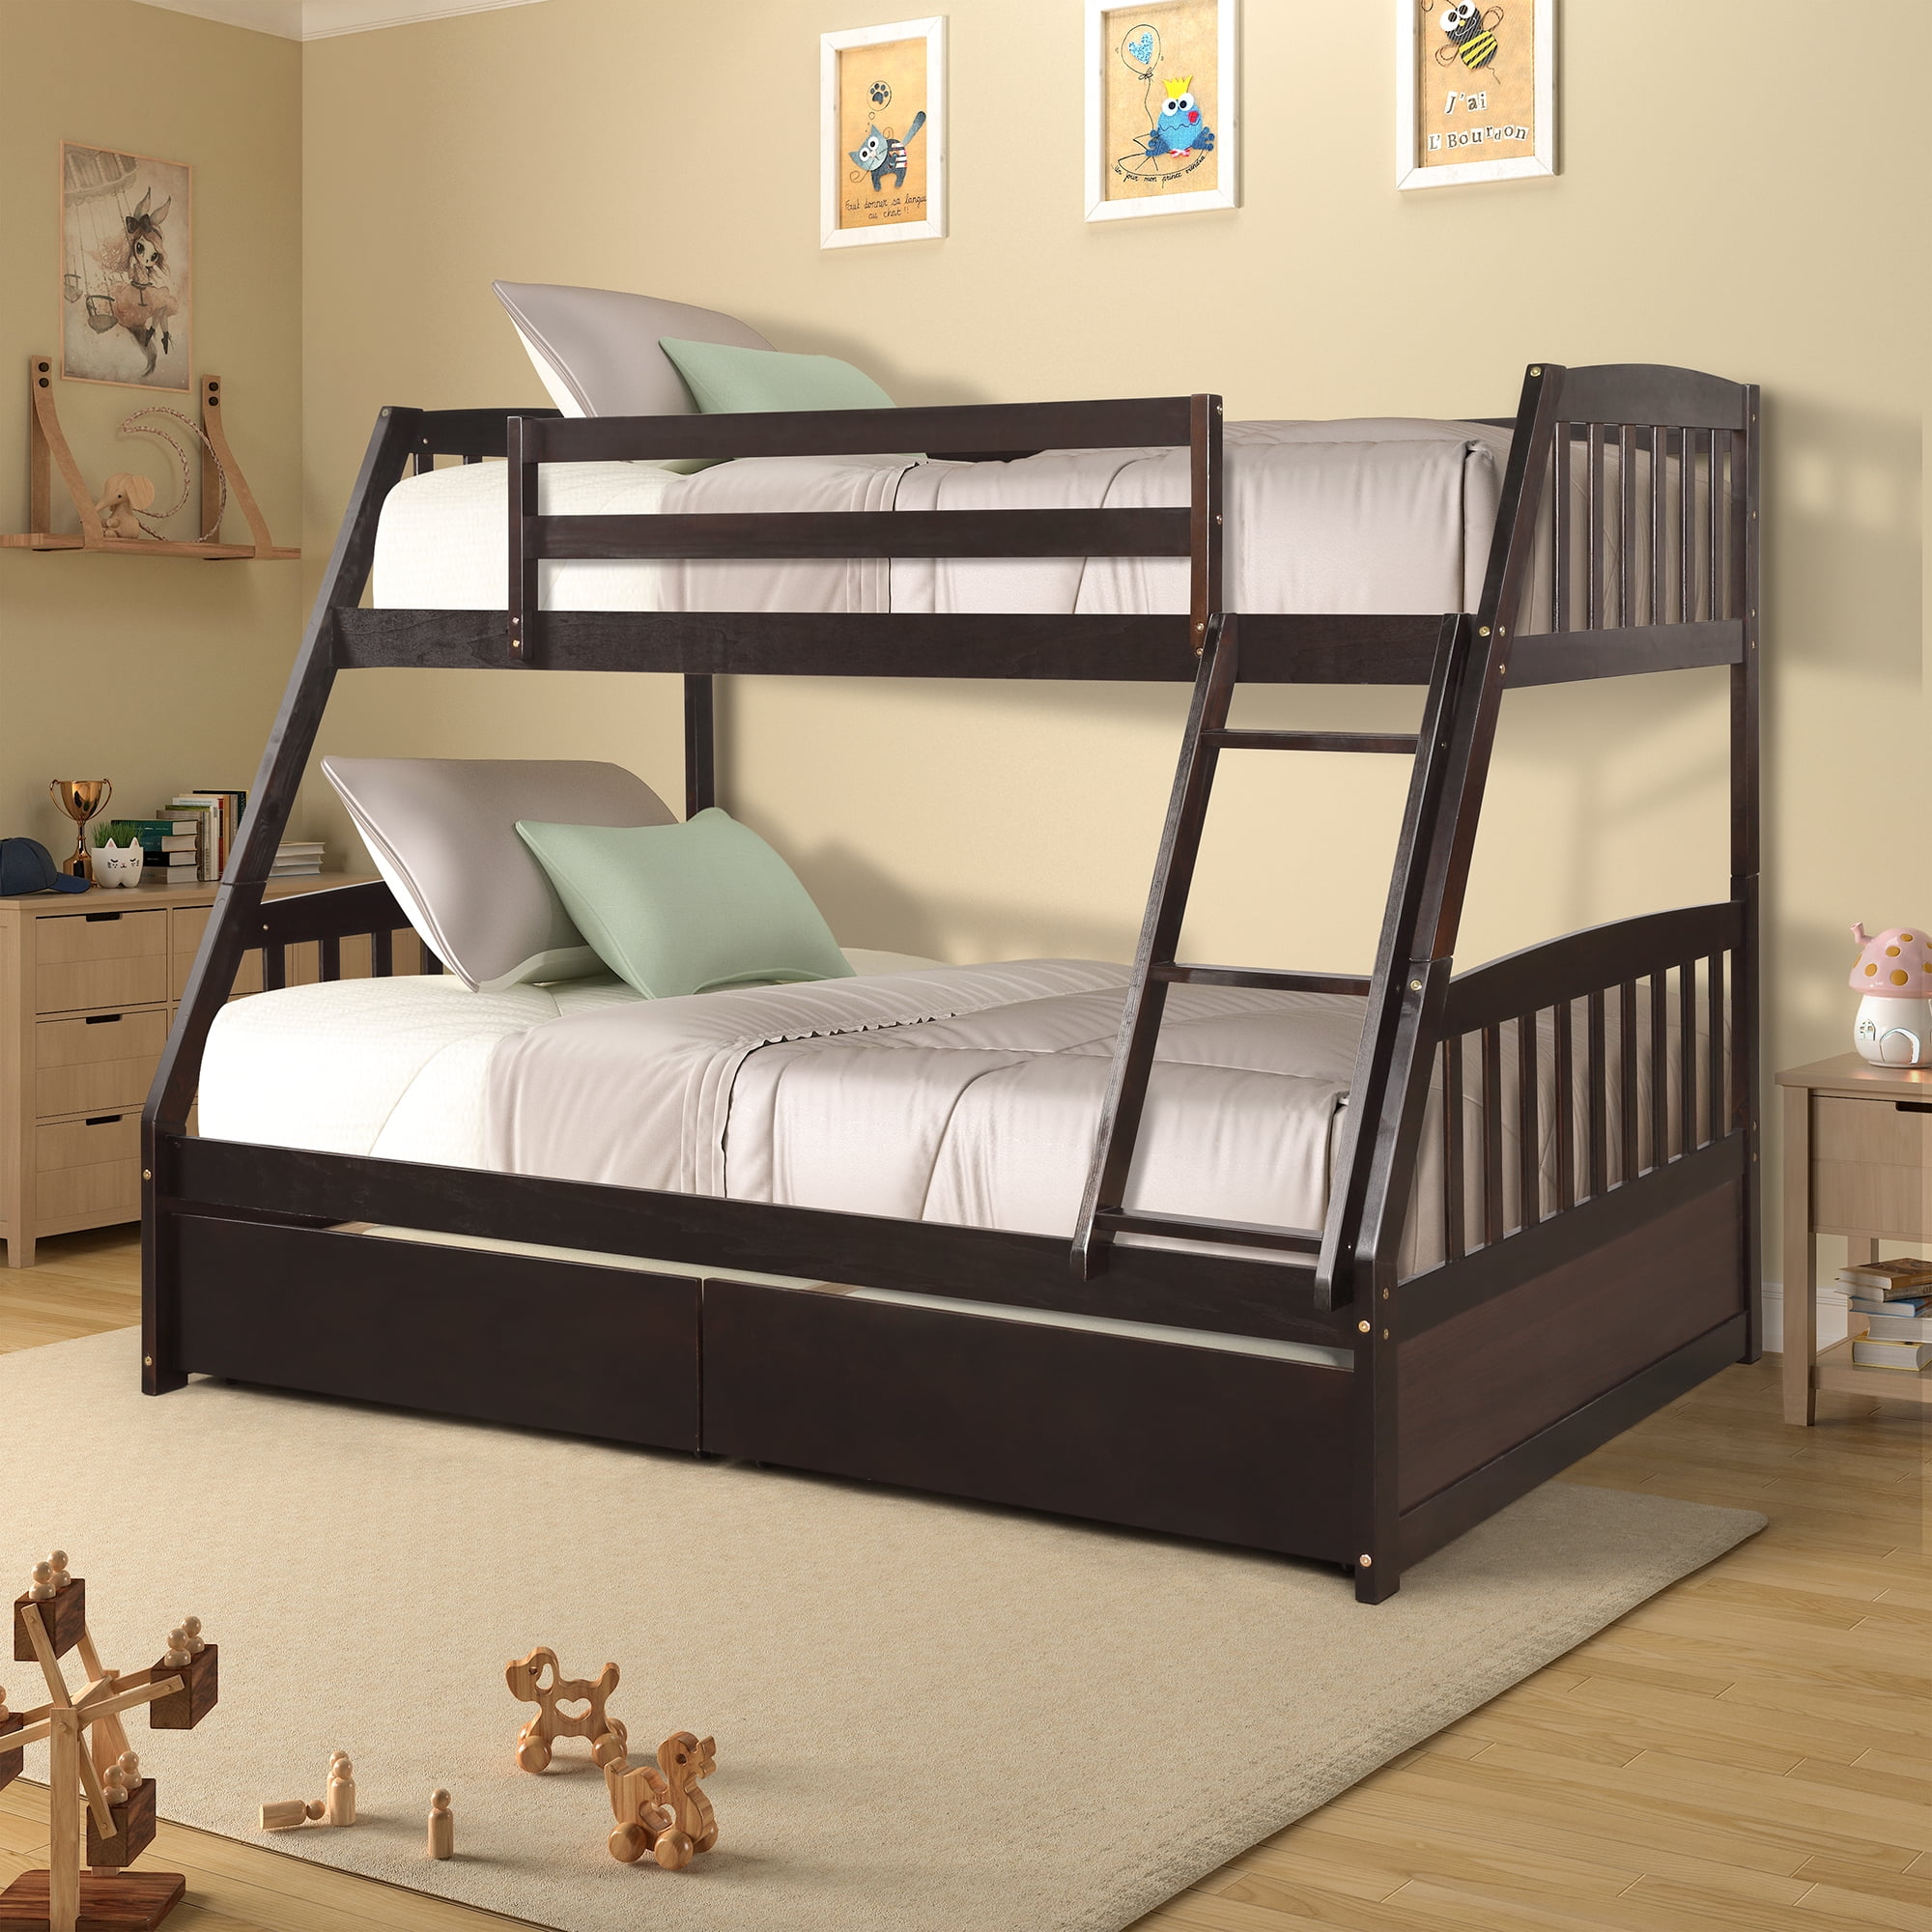 Wood Twin Over Full Bunk Beds Kids, Modern Twin Over Full Bunk Beds